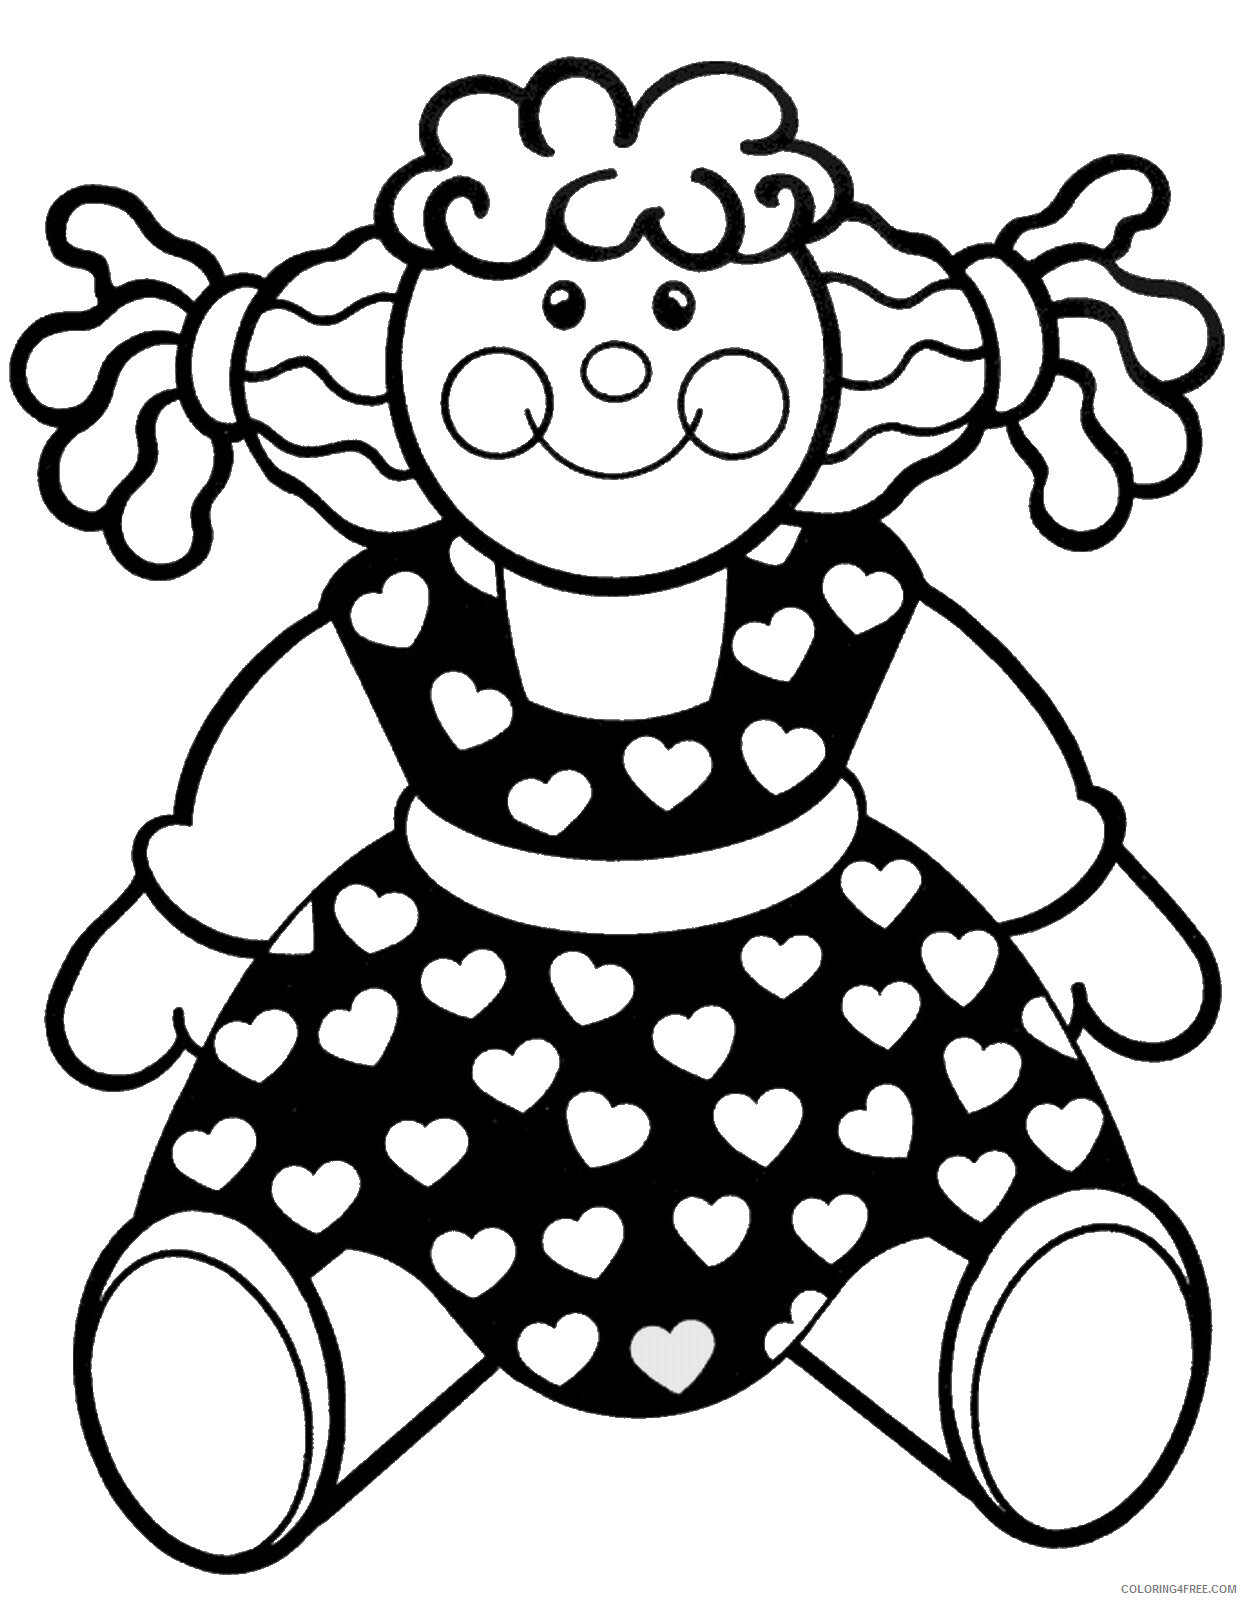 Doll Coloring Pages for Girls dolls_20 Printable 2021 0378 Coloring4free